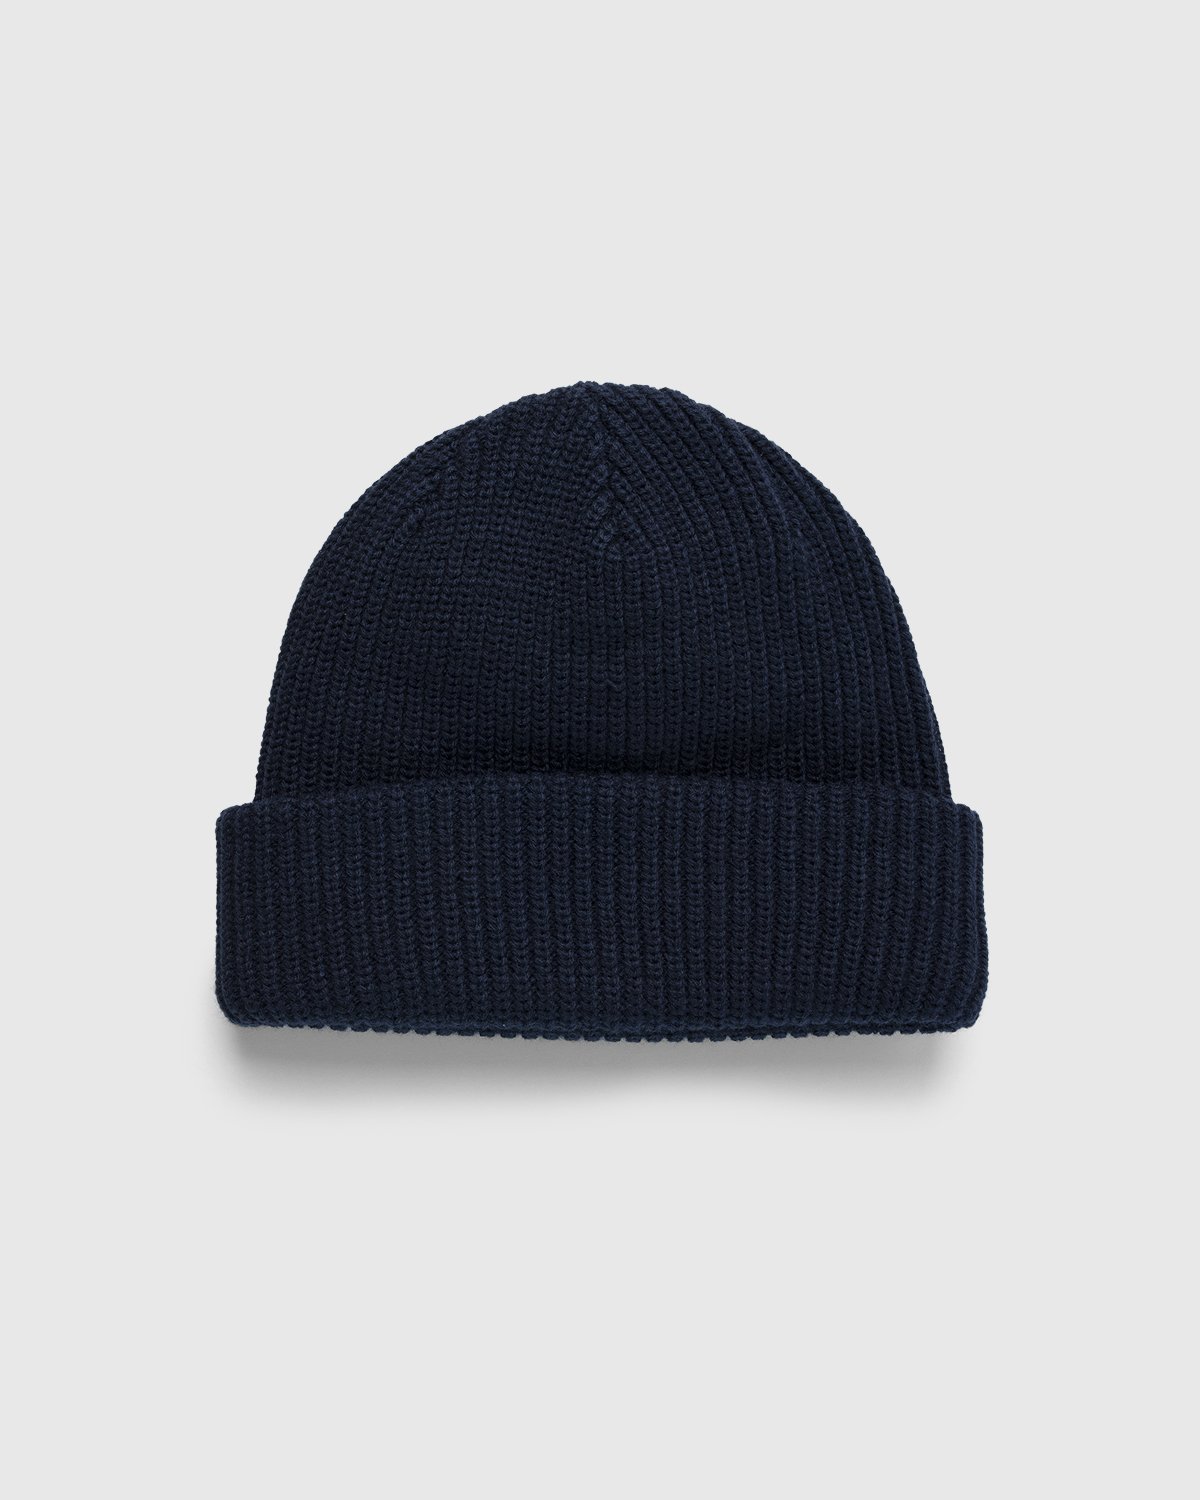 The North Face - Salty Dog Beanie Navy - Accessories - Blue - Image 2